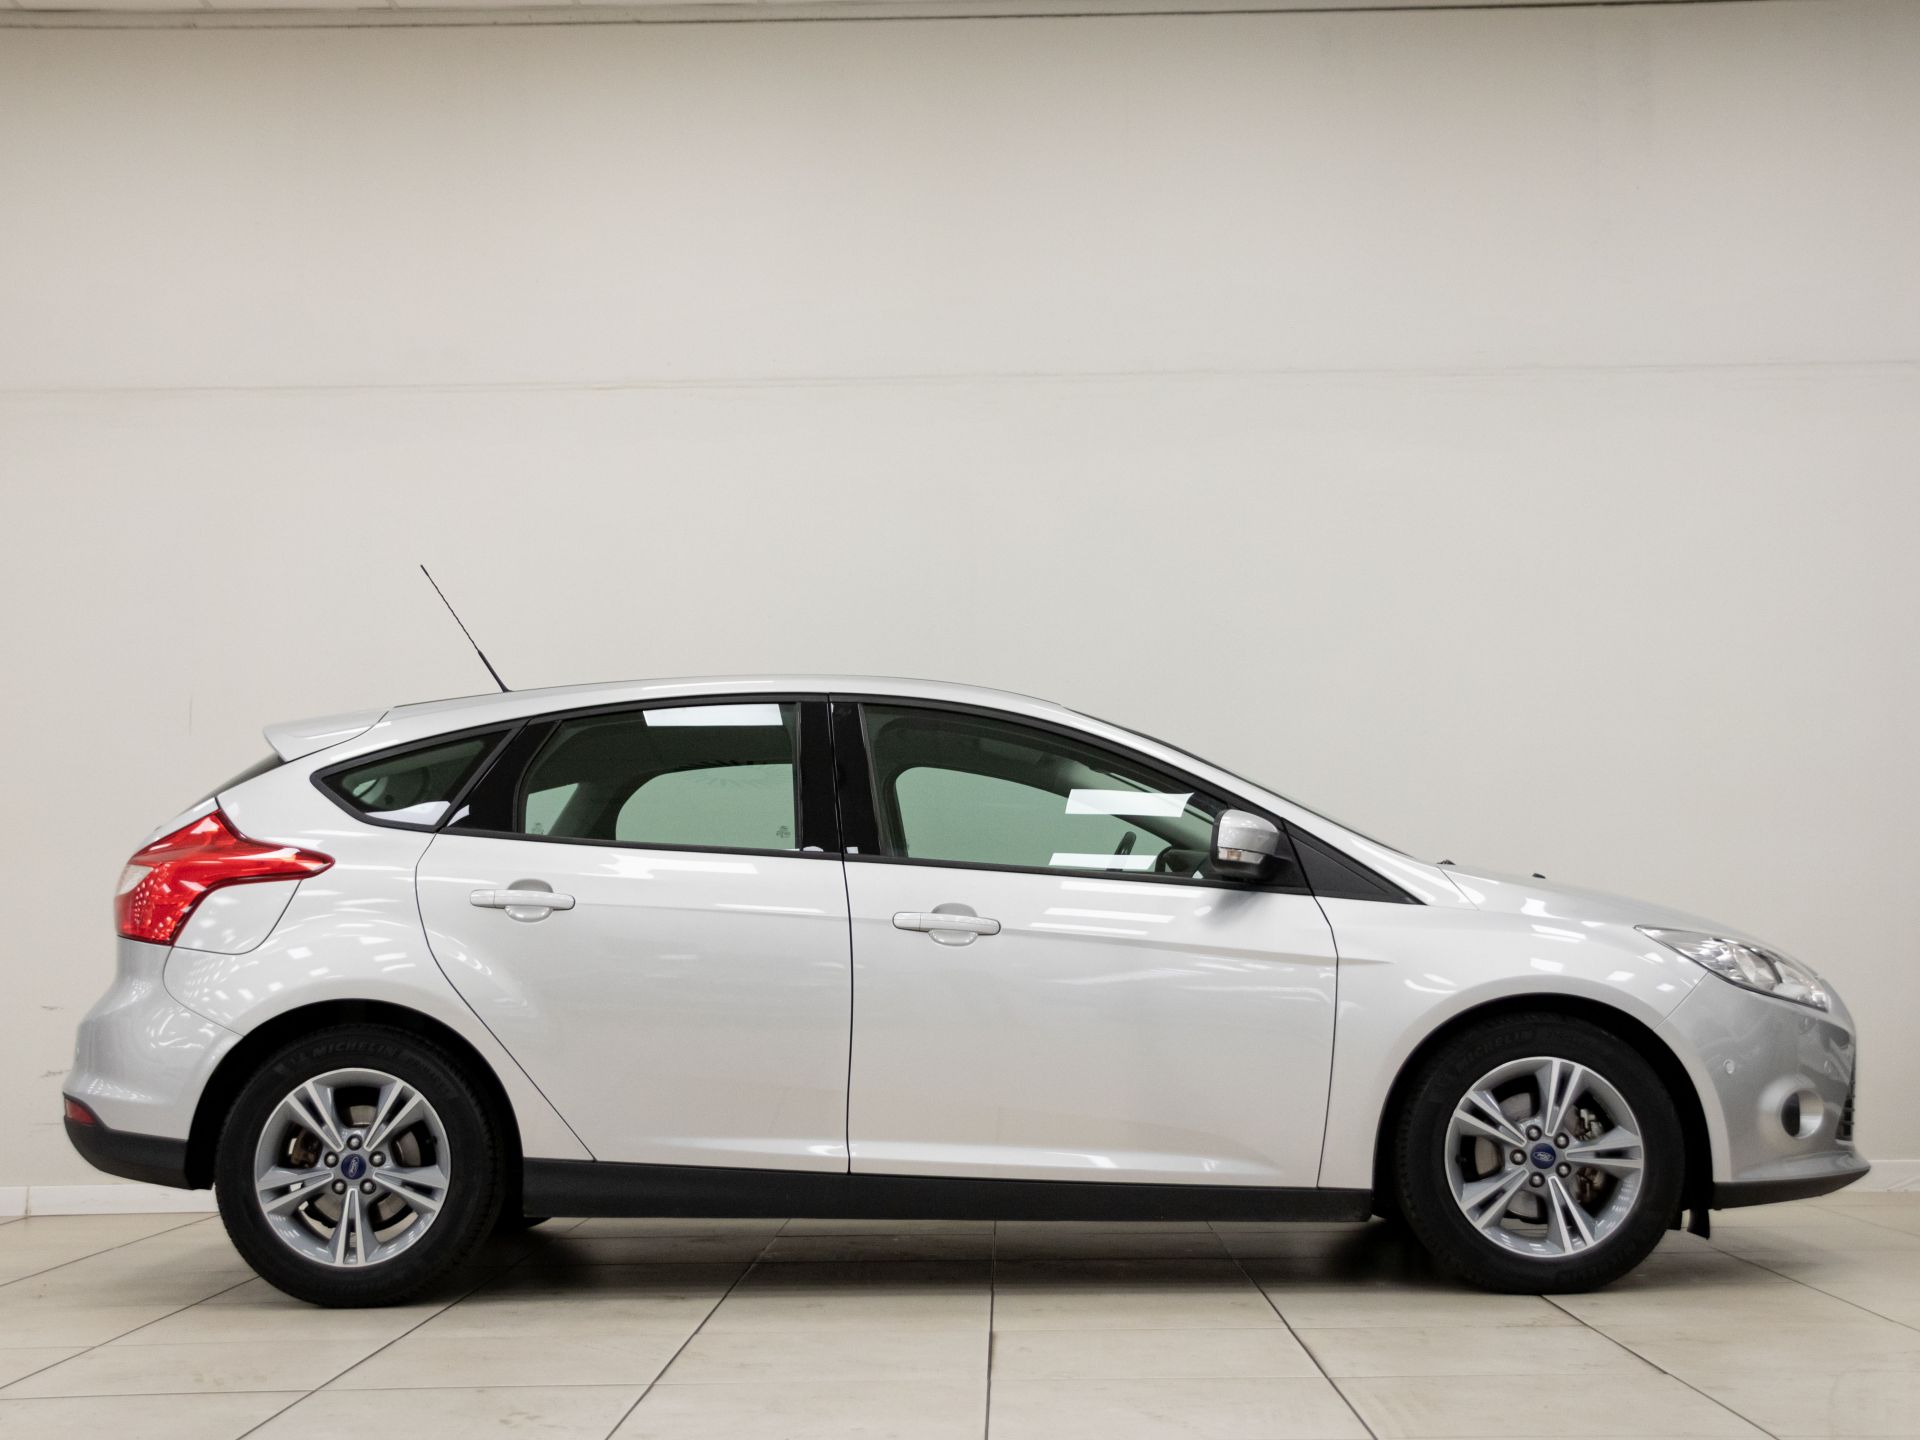 Ford Focus 1.0 Ecoboost Auto-Start-Stop 125cv Trend